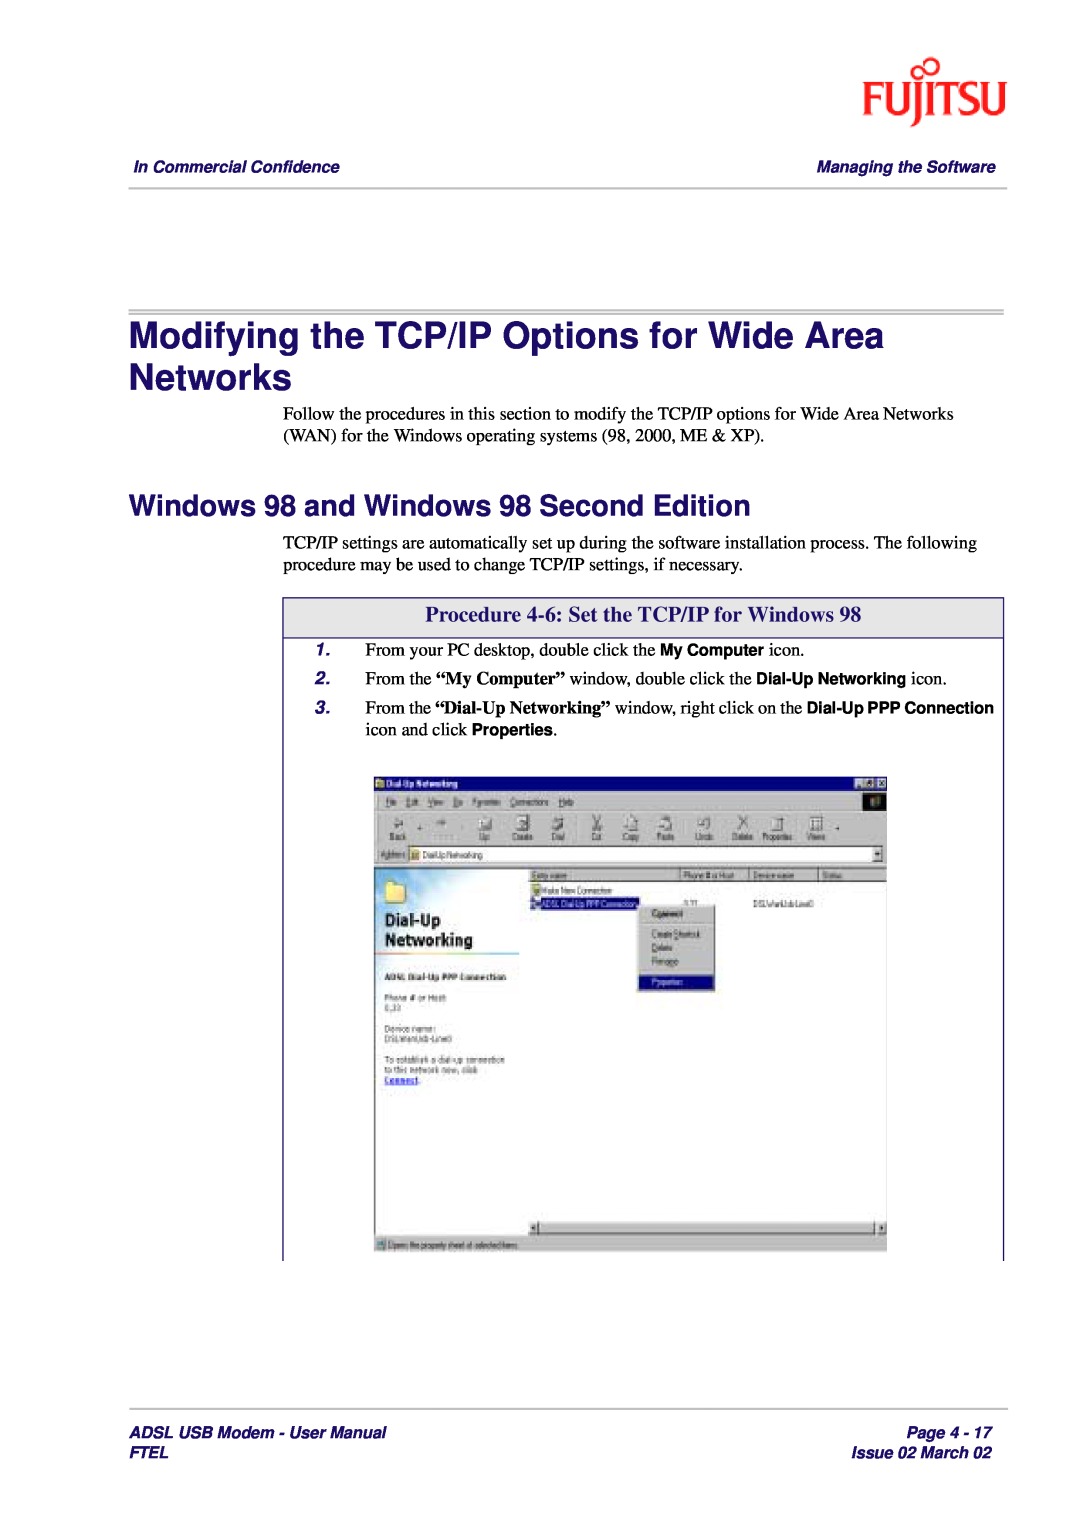 Fujitsu 3XAX-00803AAS Modifying the TCP/IP Options for Wide Area Networks, Windows 98 and Windows 98 Second Edition 